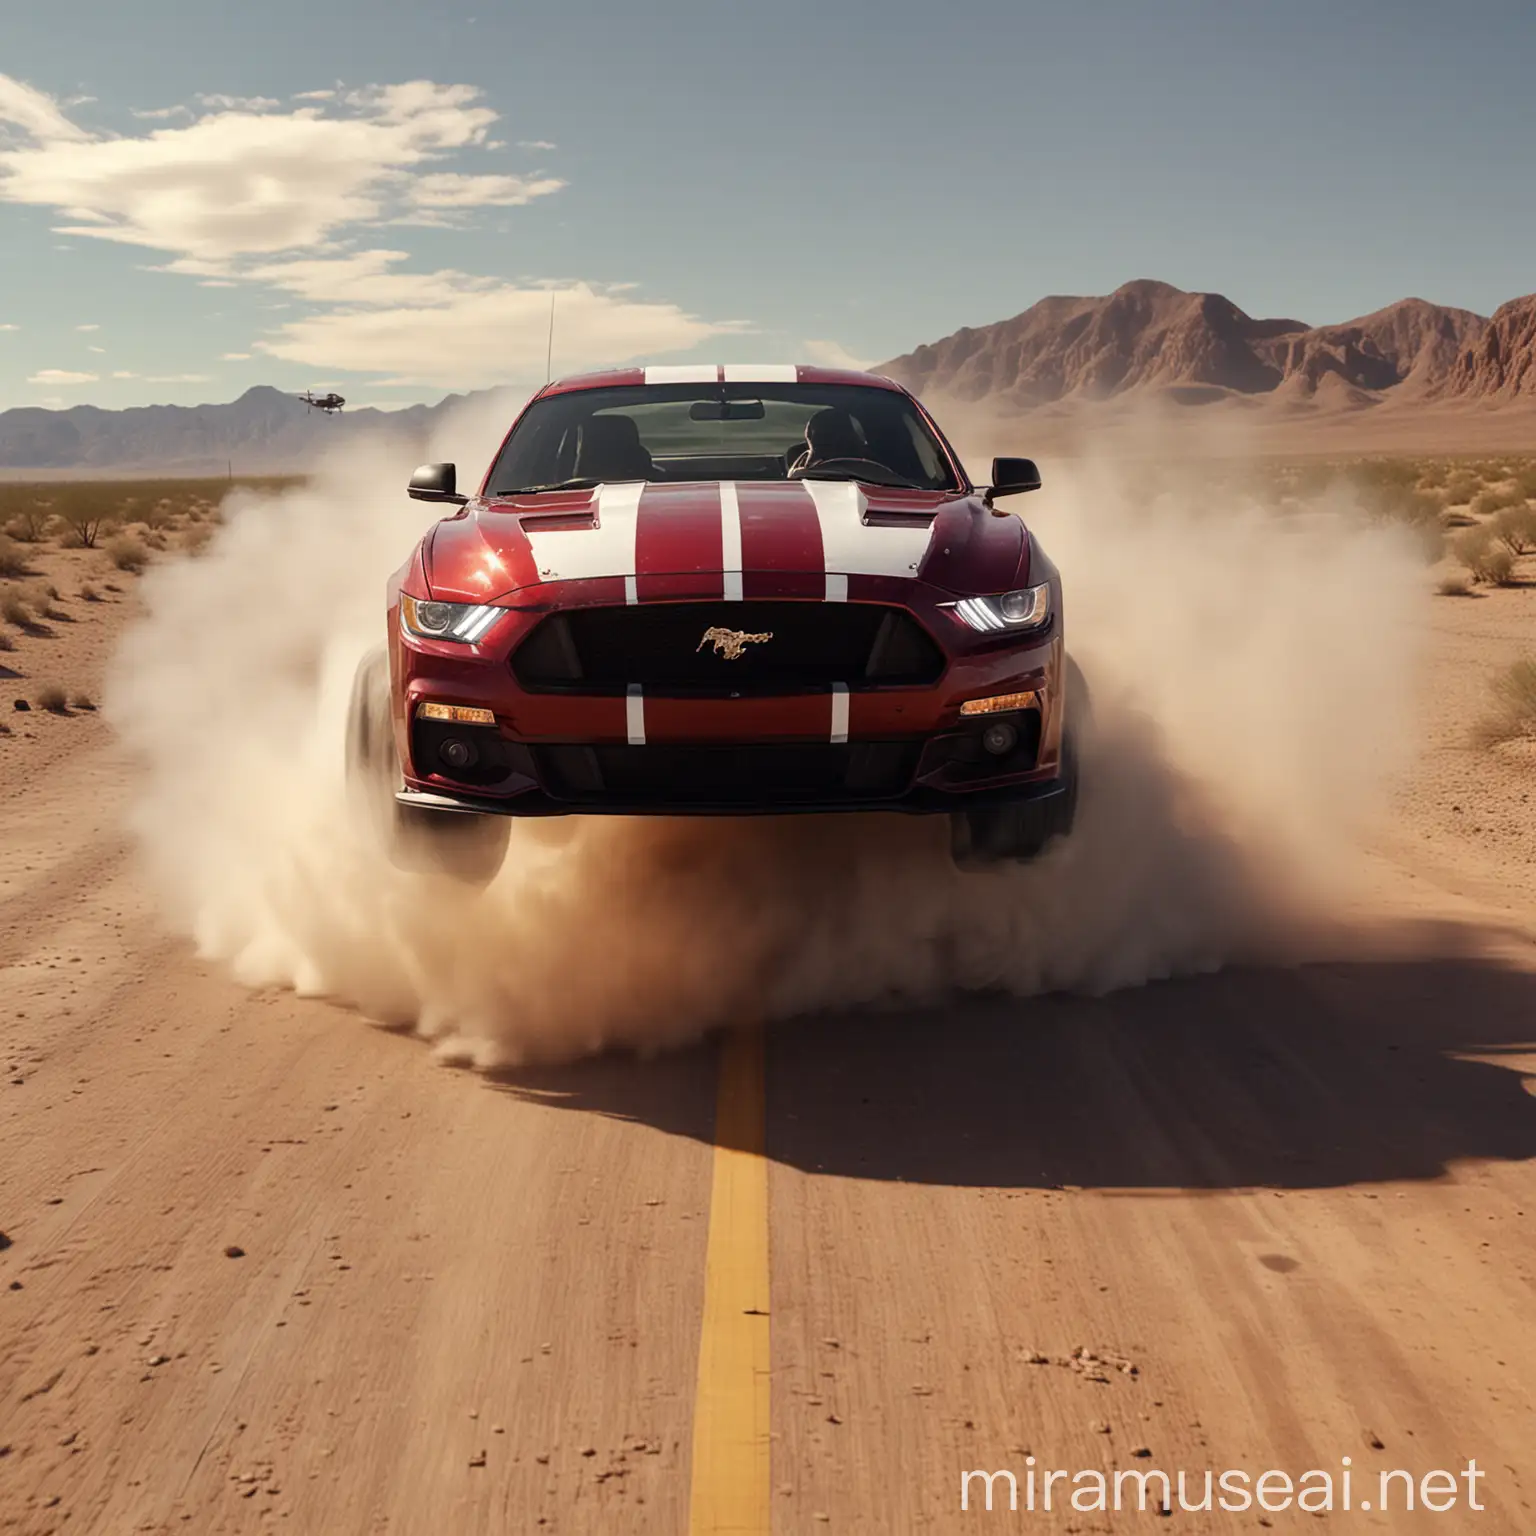 Majestic maroon and white striped Ford Mustang, gleaming in 8K realism, dashes across a blazing desert sandscape, igniting the asphalt in a fiery trail, amid a high-octane chase scene featuring a vigilant helicopter, machine gunning from above, while the Mustang speeds away, leaving a trail of blazing tarmac behind.